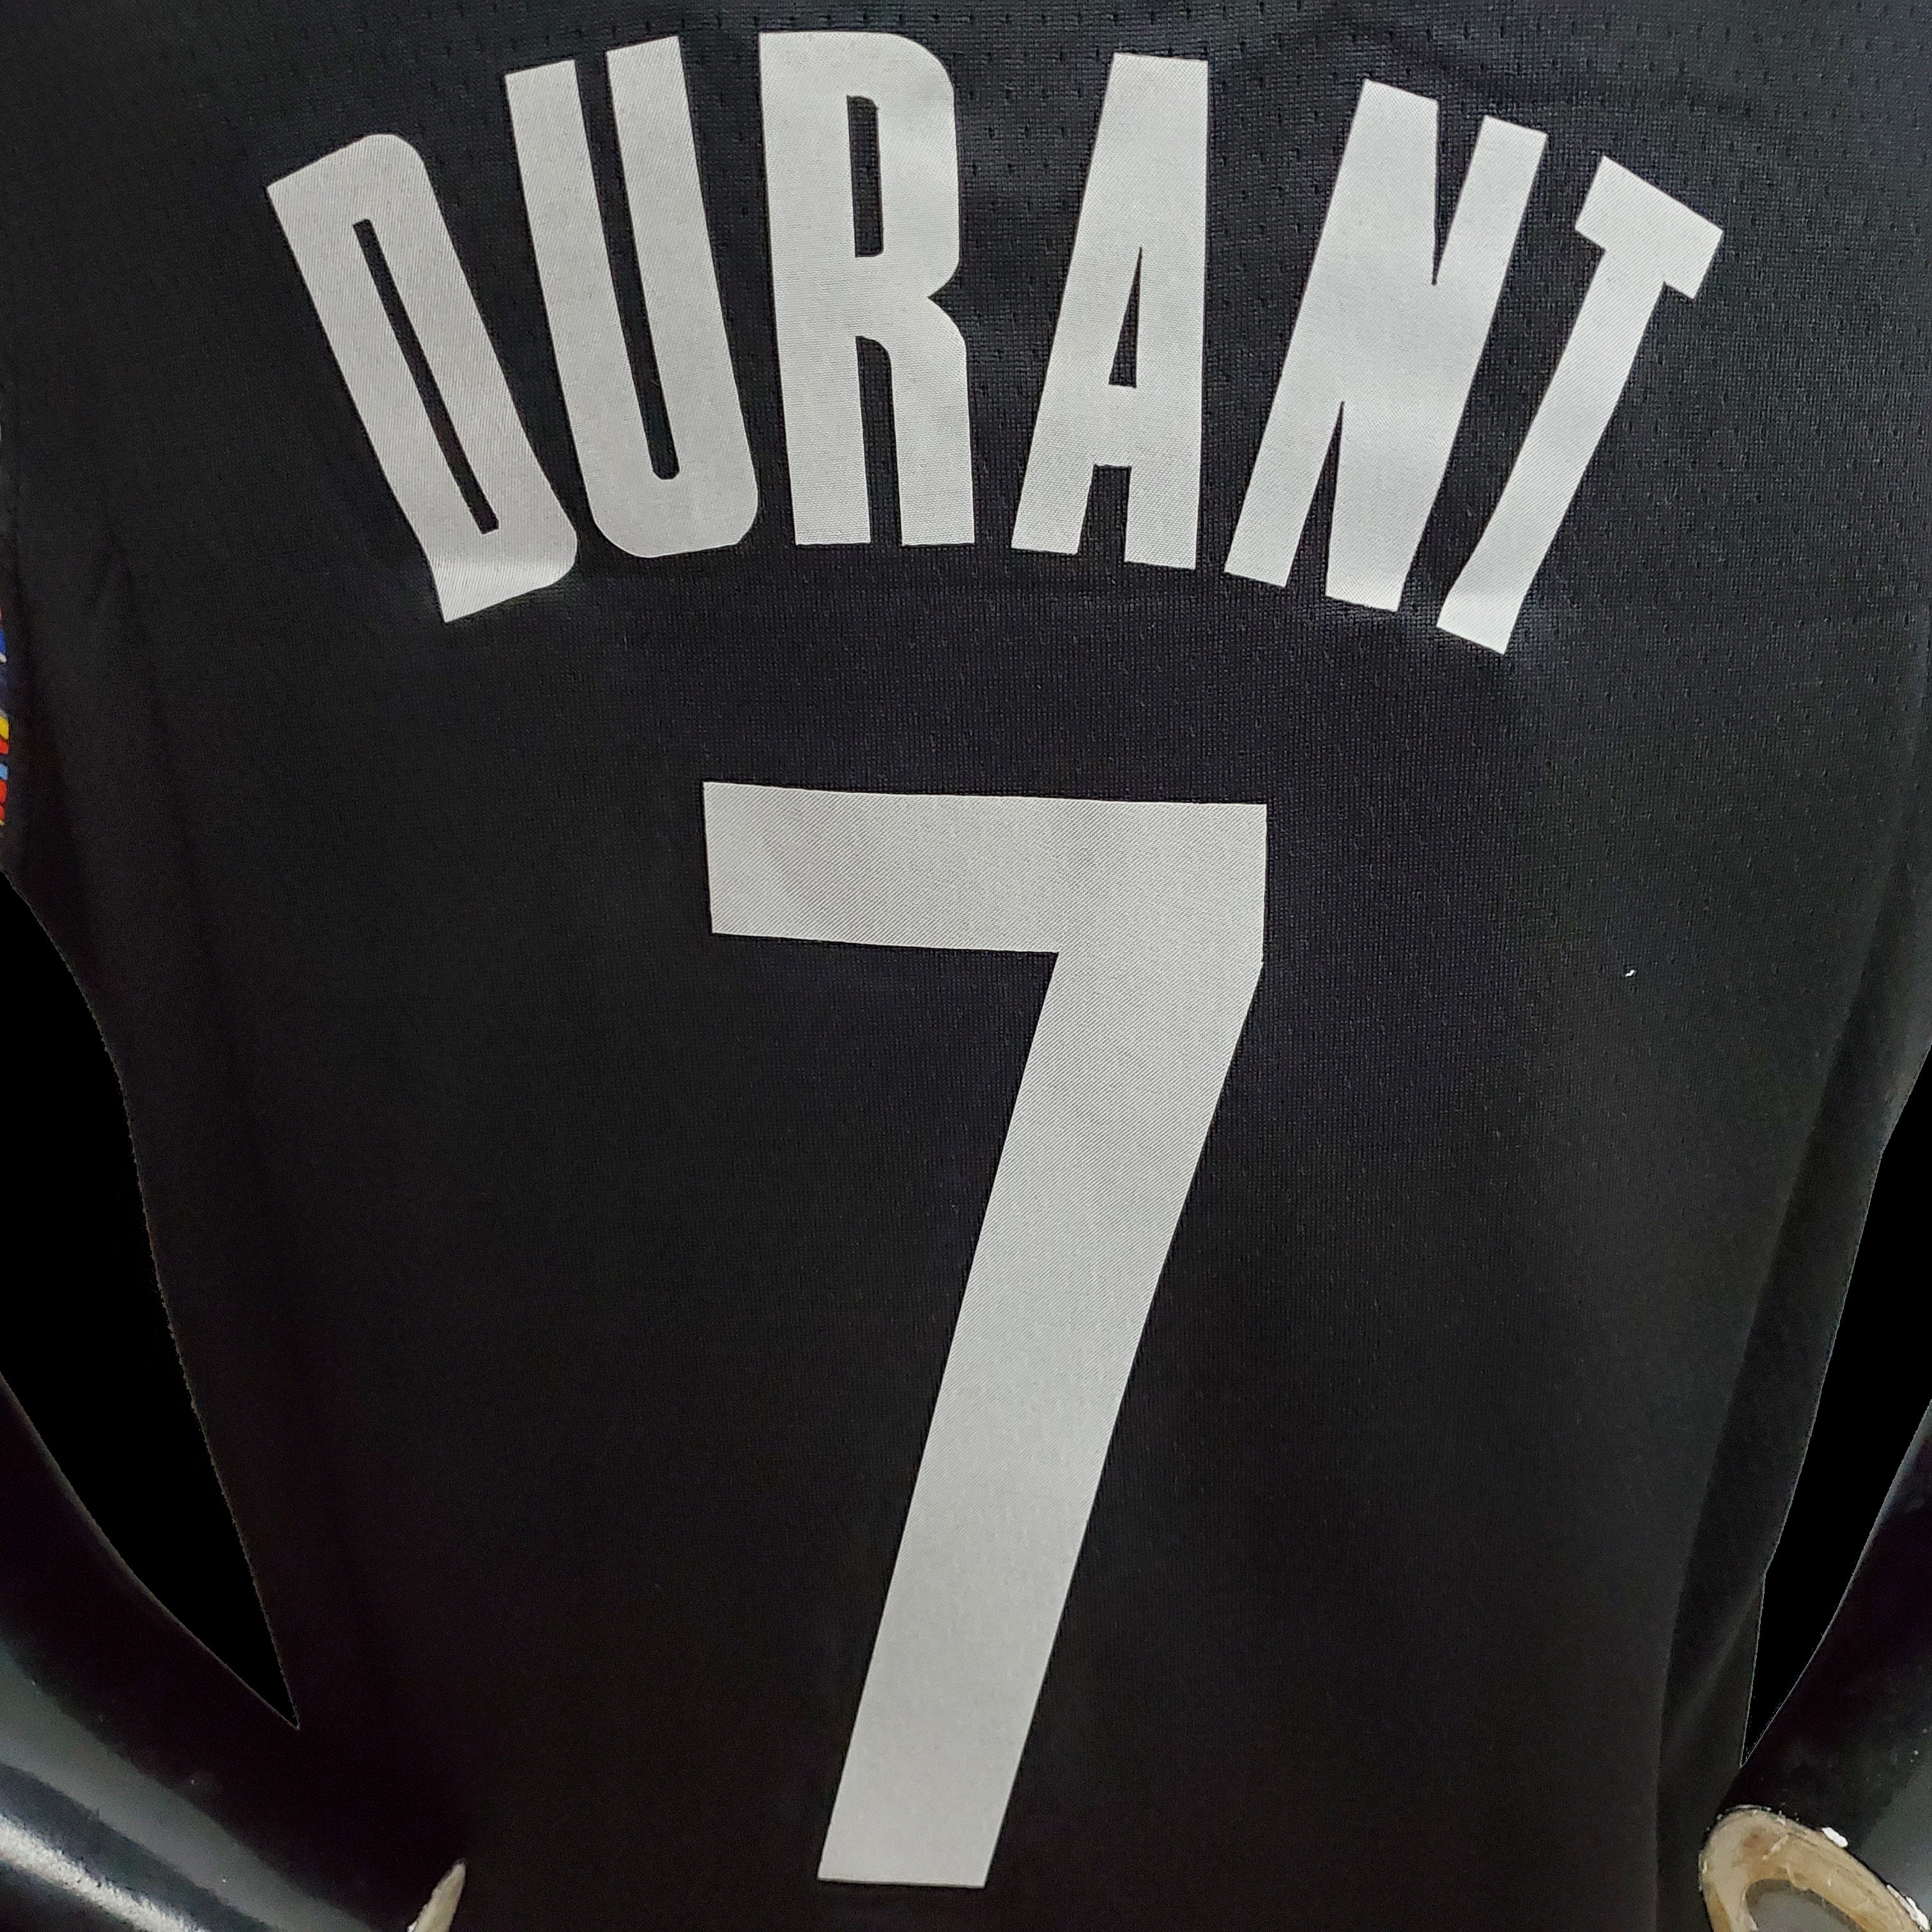 Kevin Durant City Edition Brooklyn Nets Jersey Comparion 